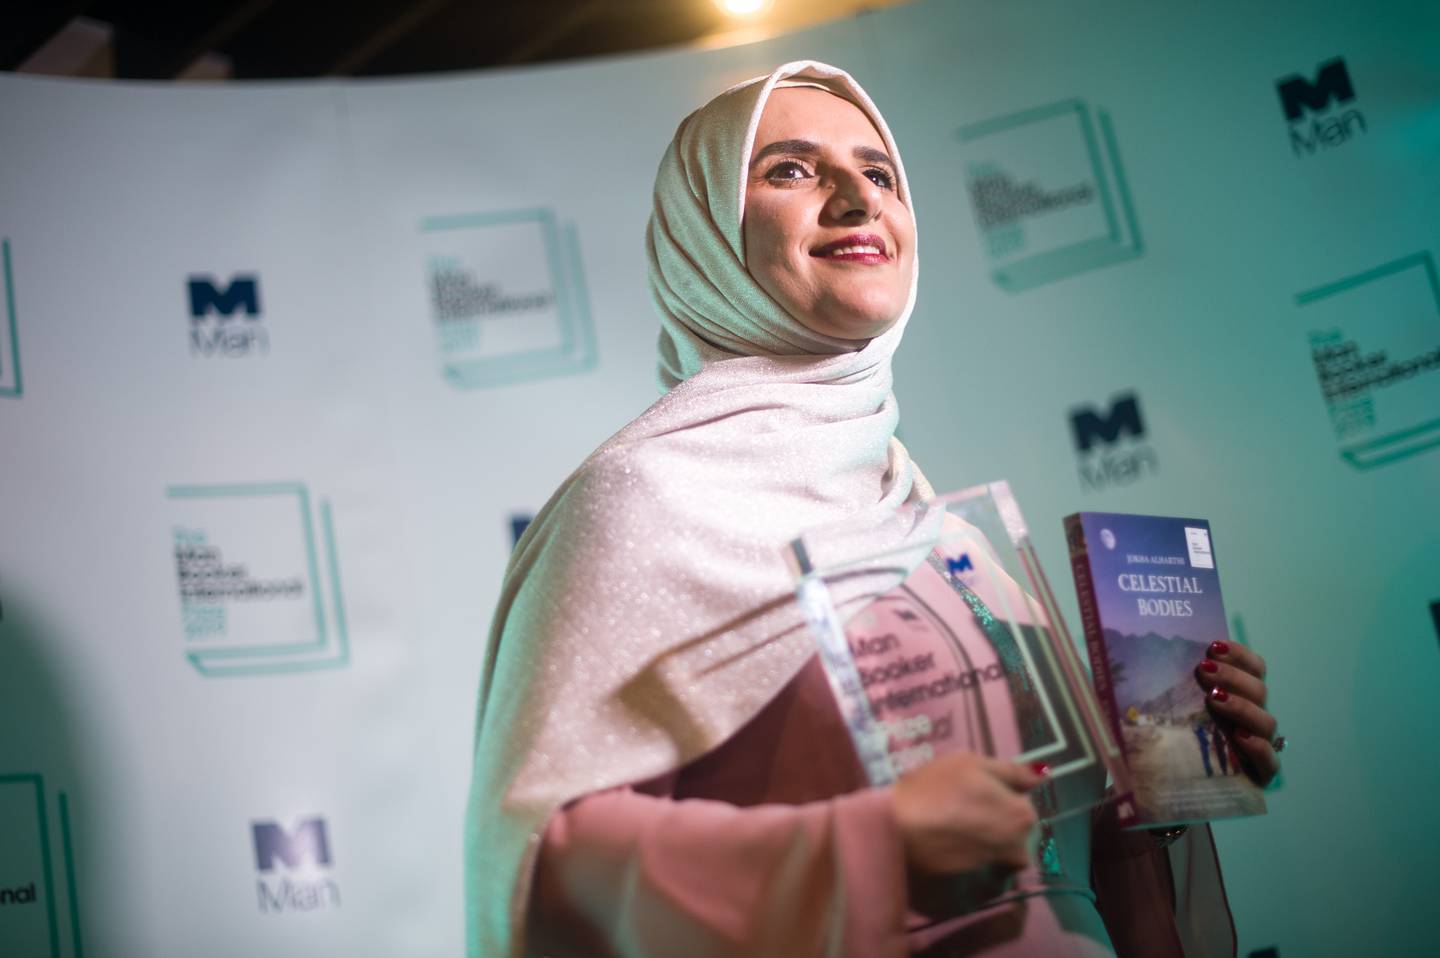 Jokha Alharthi's book 'Celestial Bodies' won the 2019 Man Booker International Prize. Getty Images